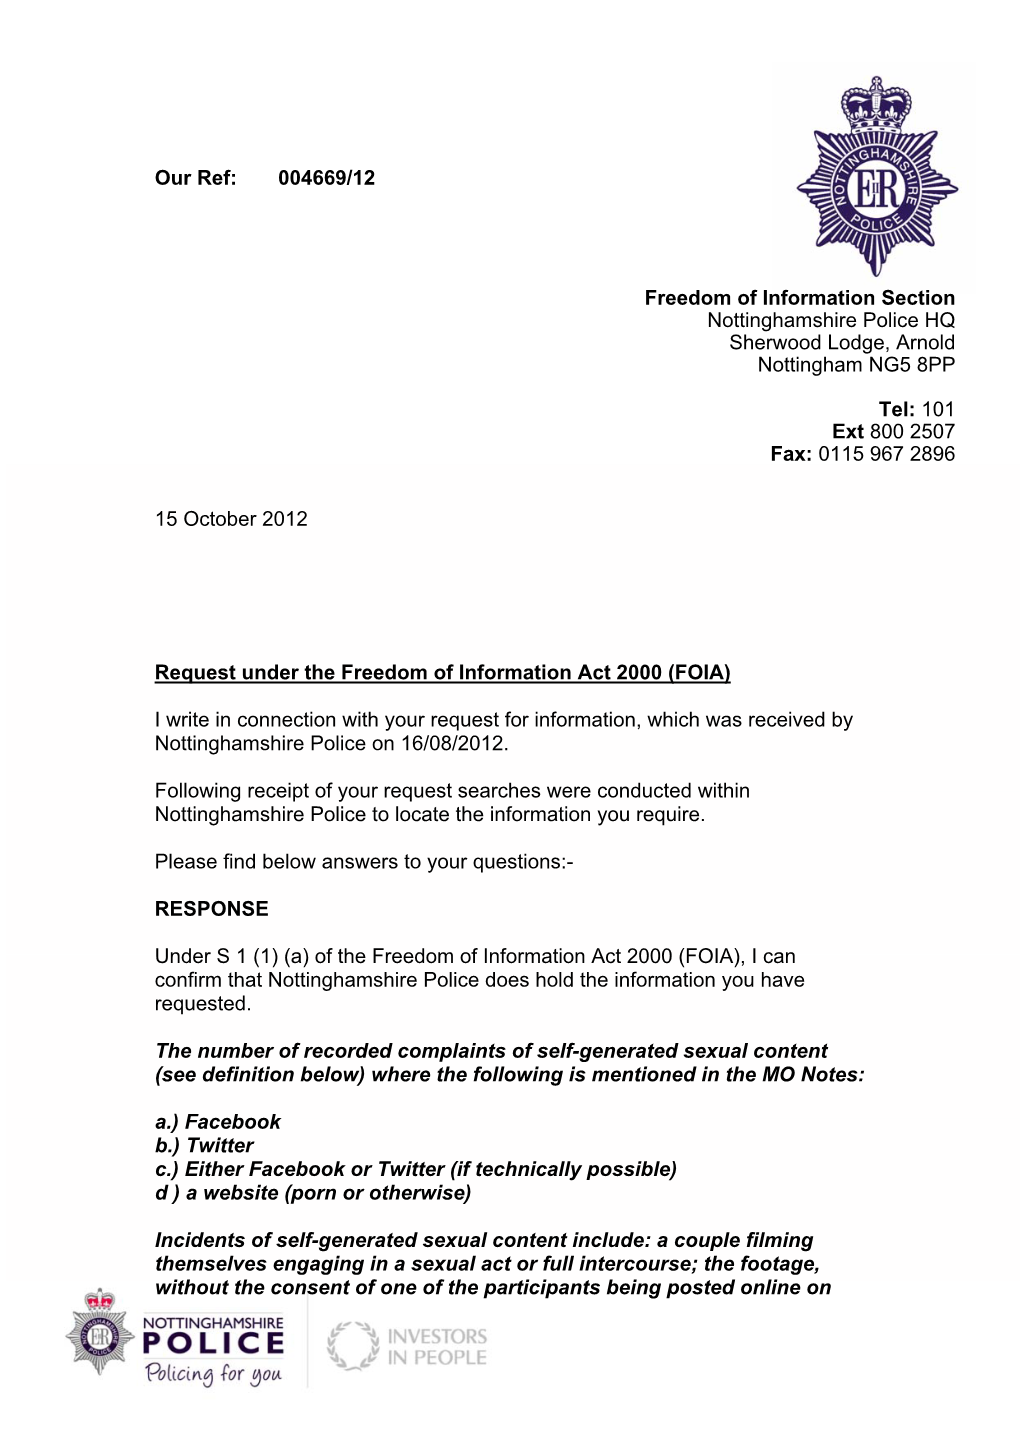 FOI 004669 12 Number of Complaints Regarding Self Generated Sexual Content Where Social Media Sites Are Mentioned